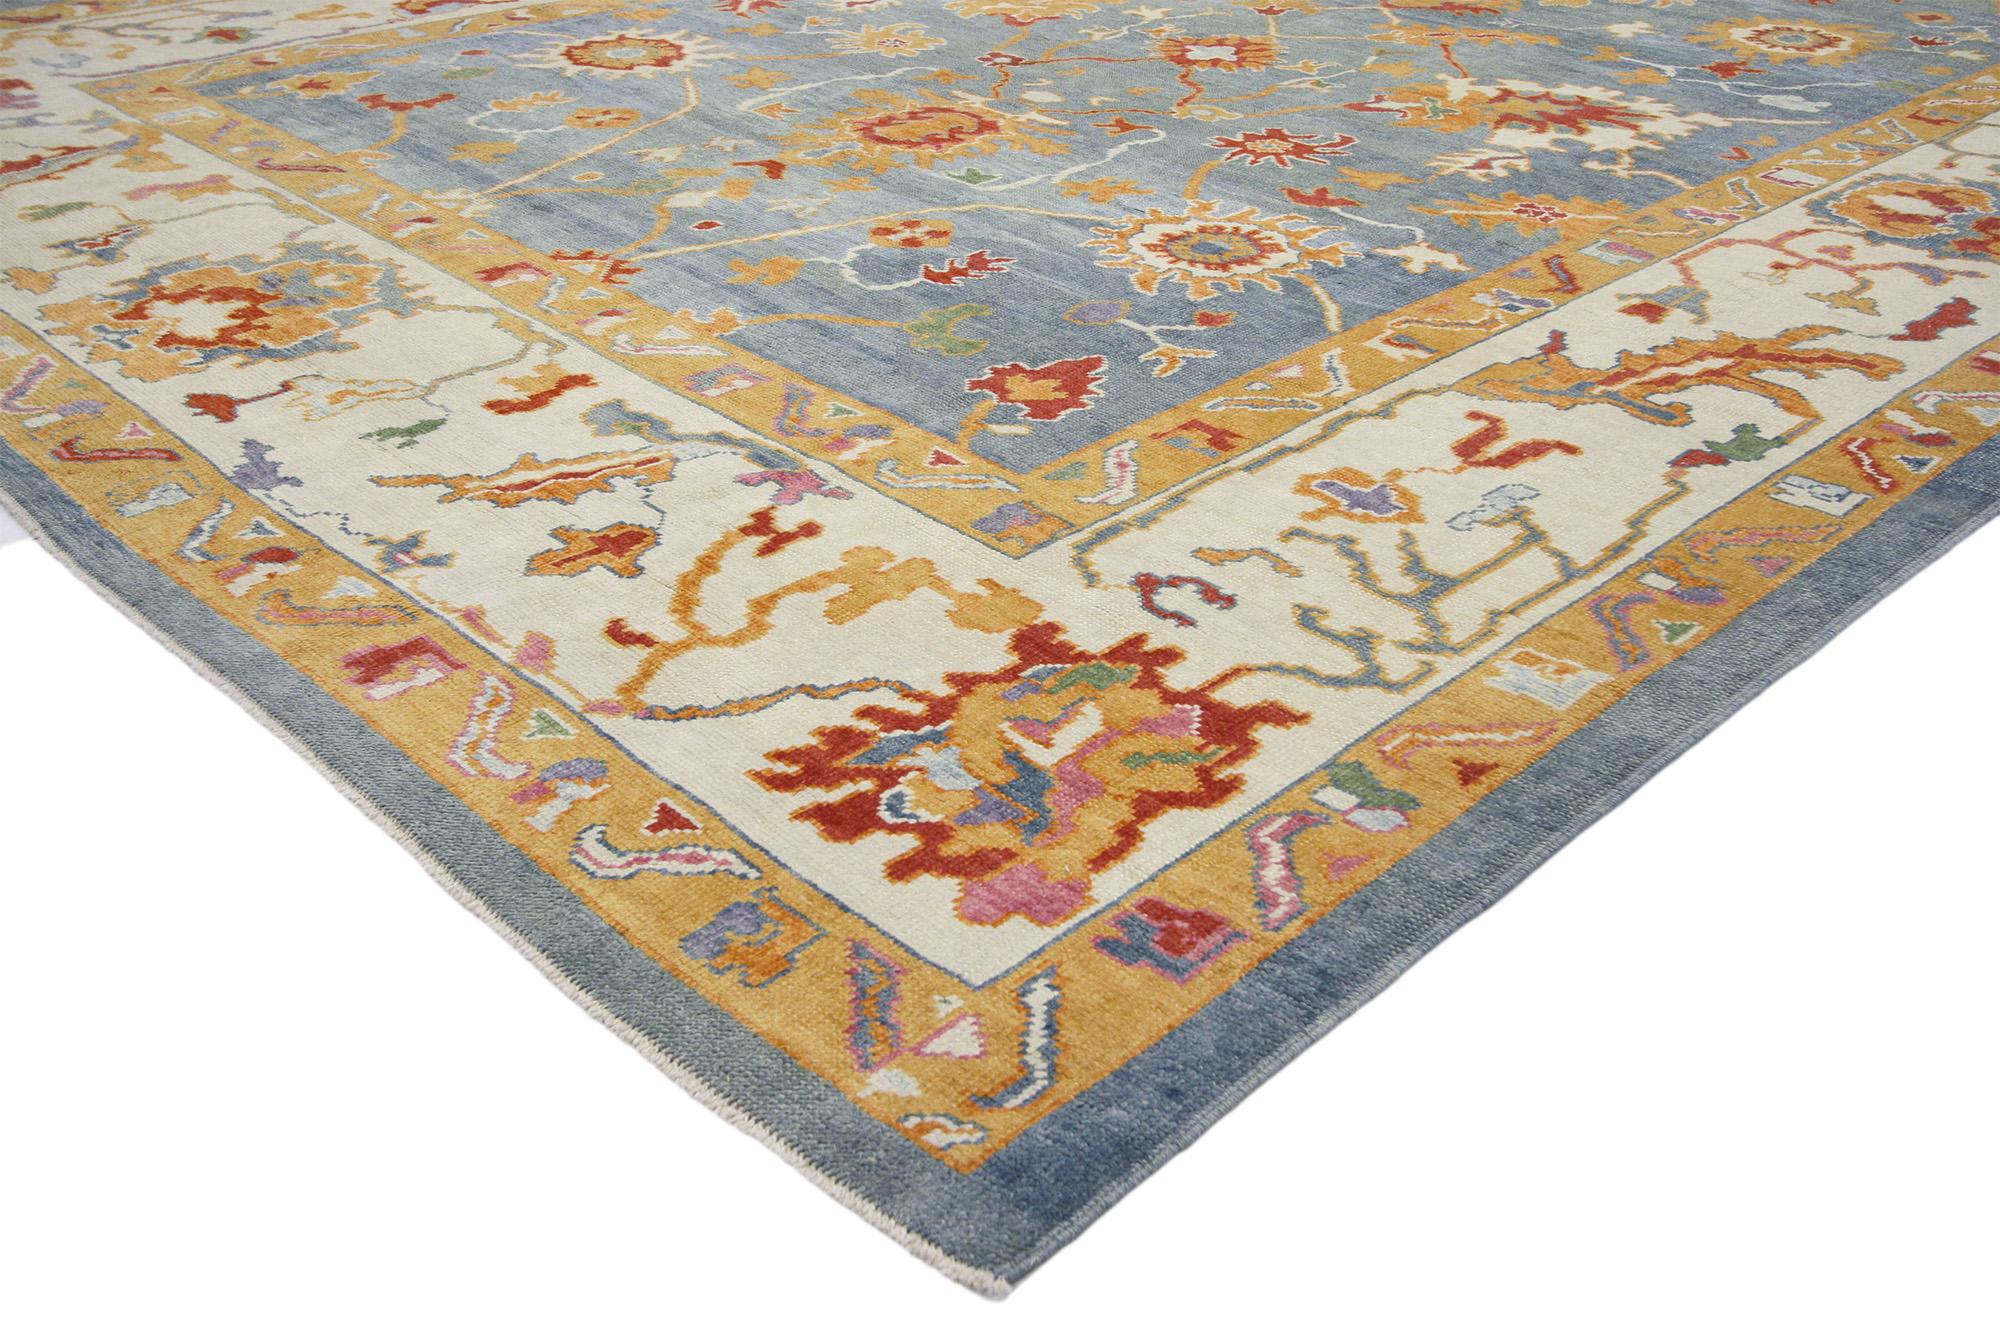 52368 New Colorful Blue Turkish Oushak Rug,11'02 x 14'10. Turkish Oushak rugs, originating from the Western region of Oushak in Turkey, are celebrated for their intricate designs, tranquil color palettes, and luxurious wool materials. With their